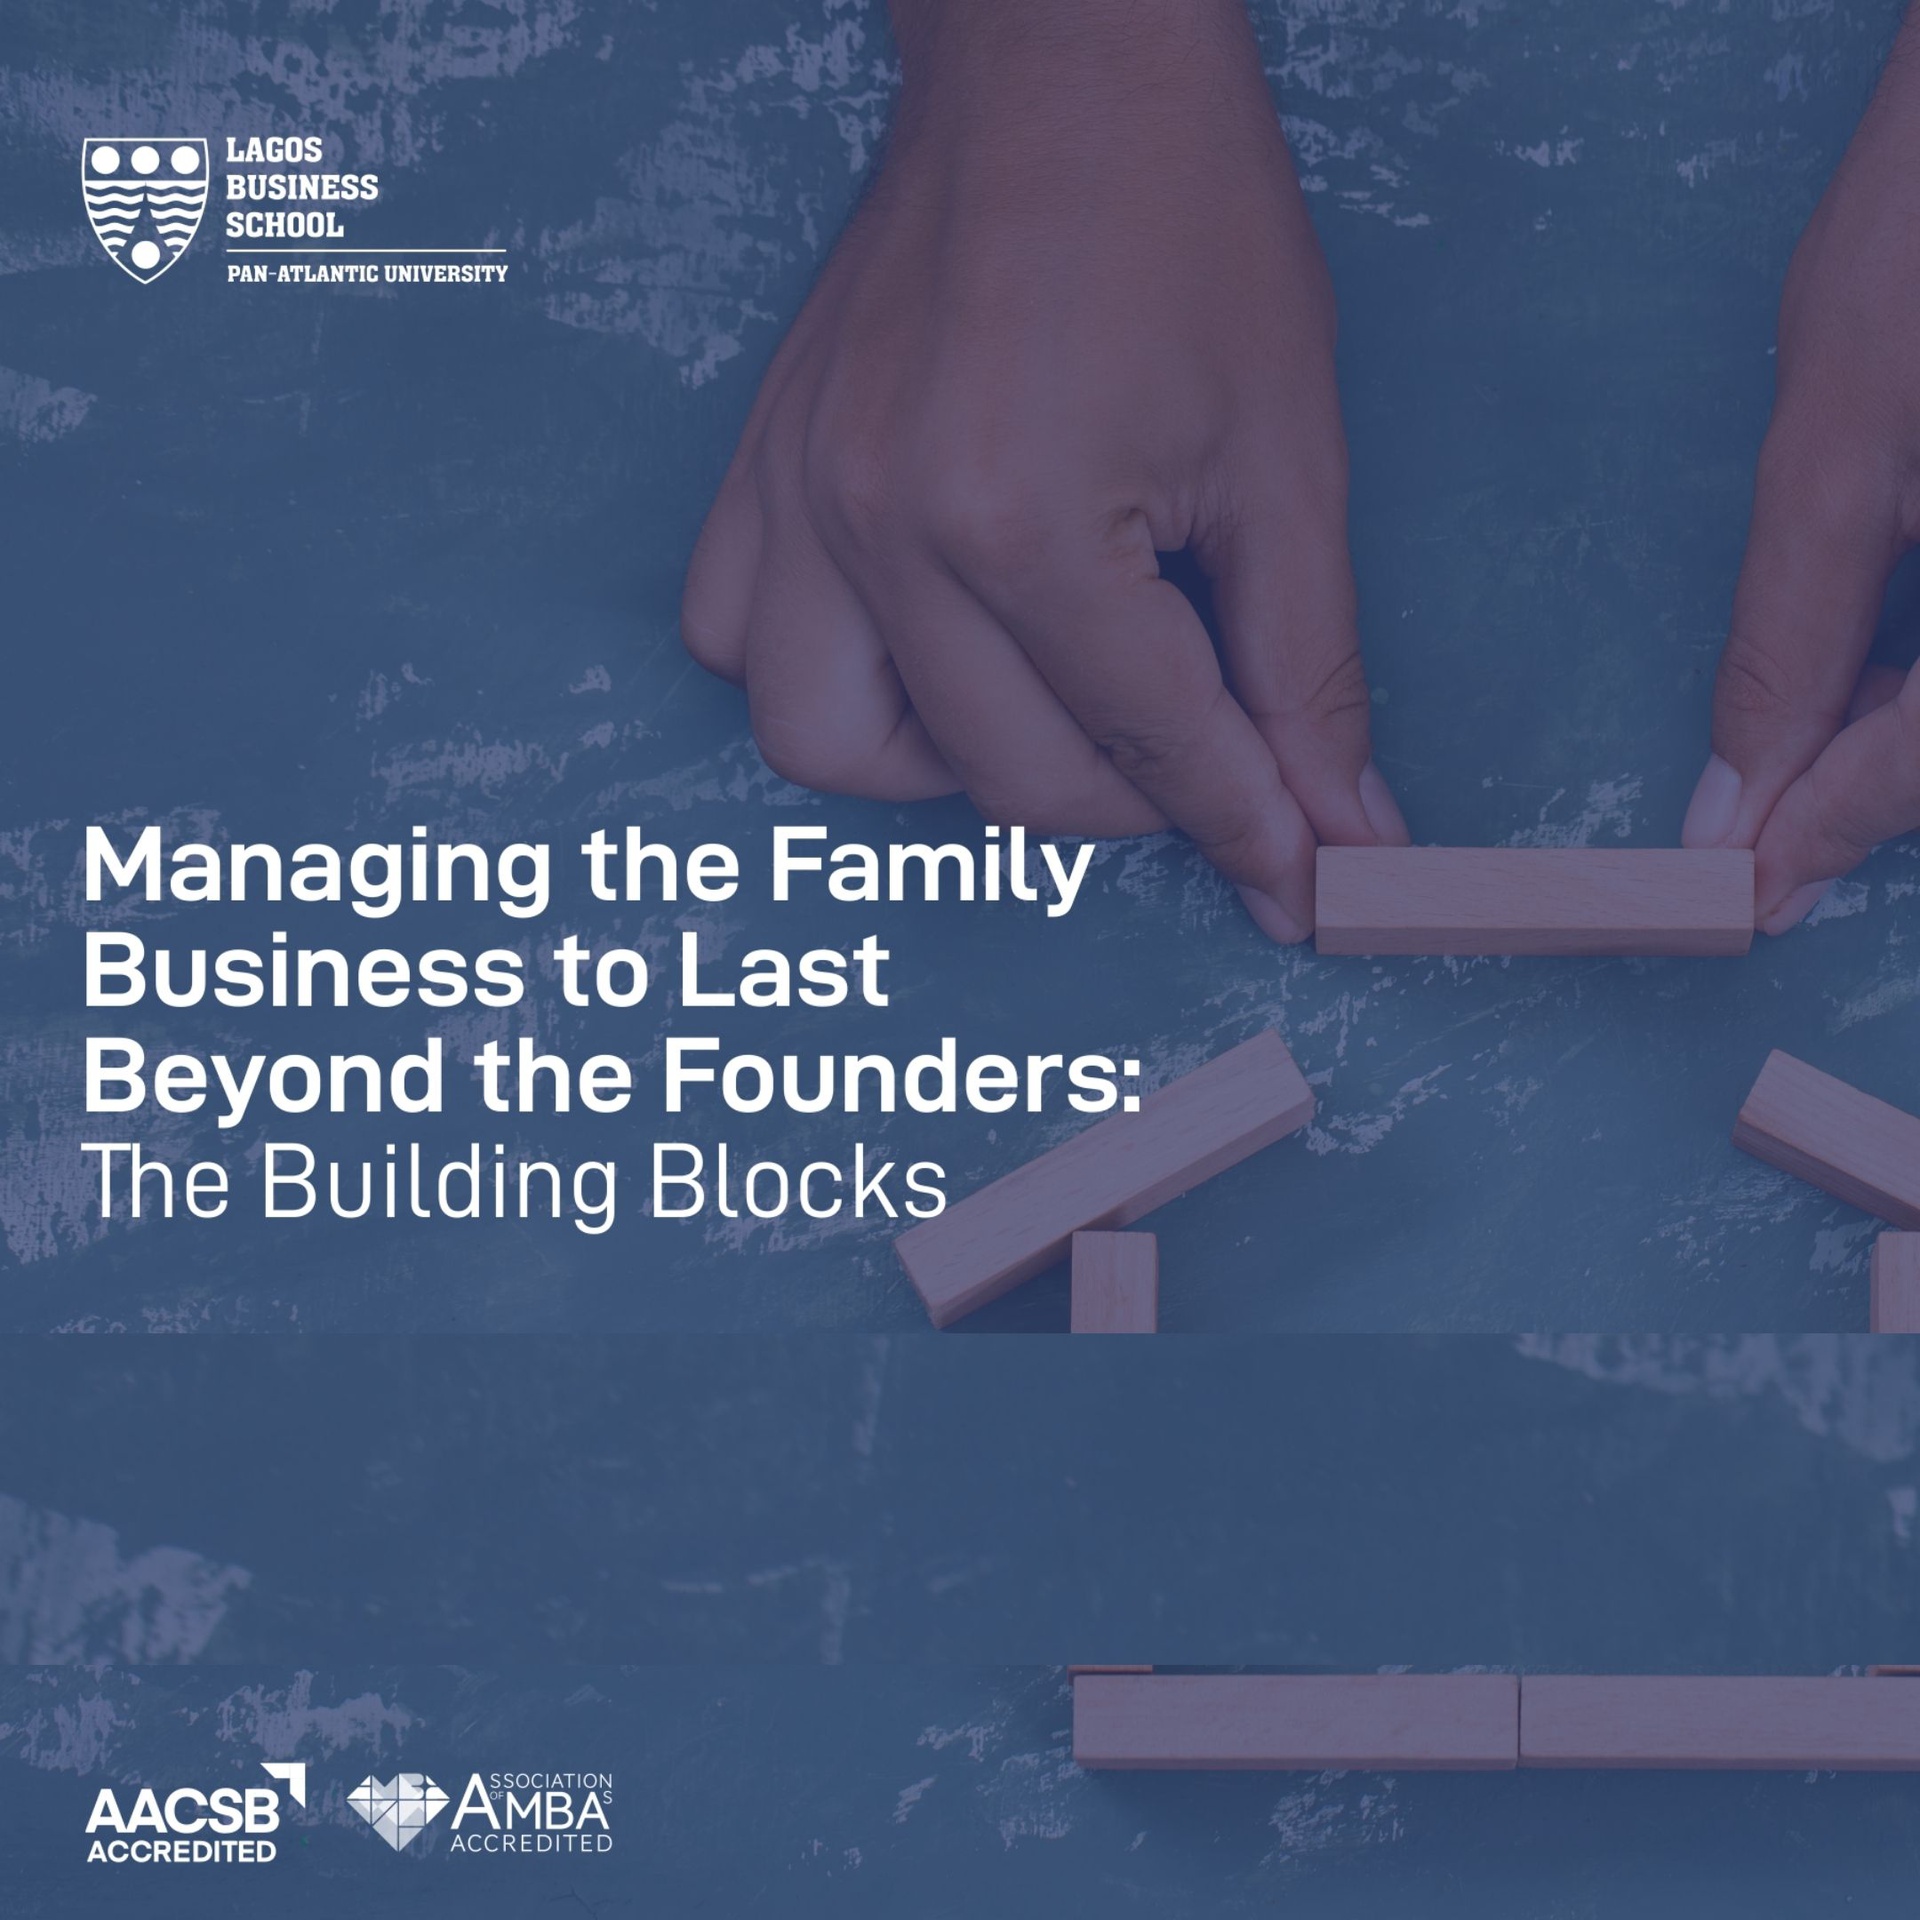 Managing the Family Business to Last Beyond the Founders: The Building Blocks